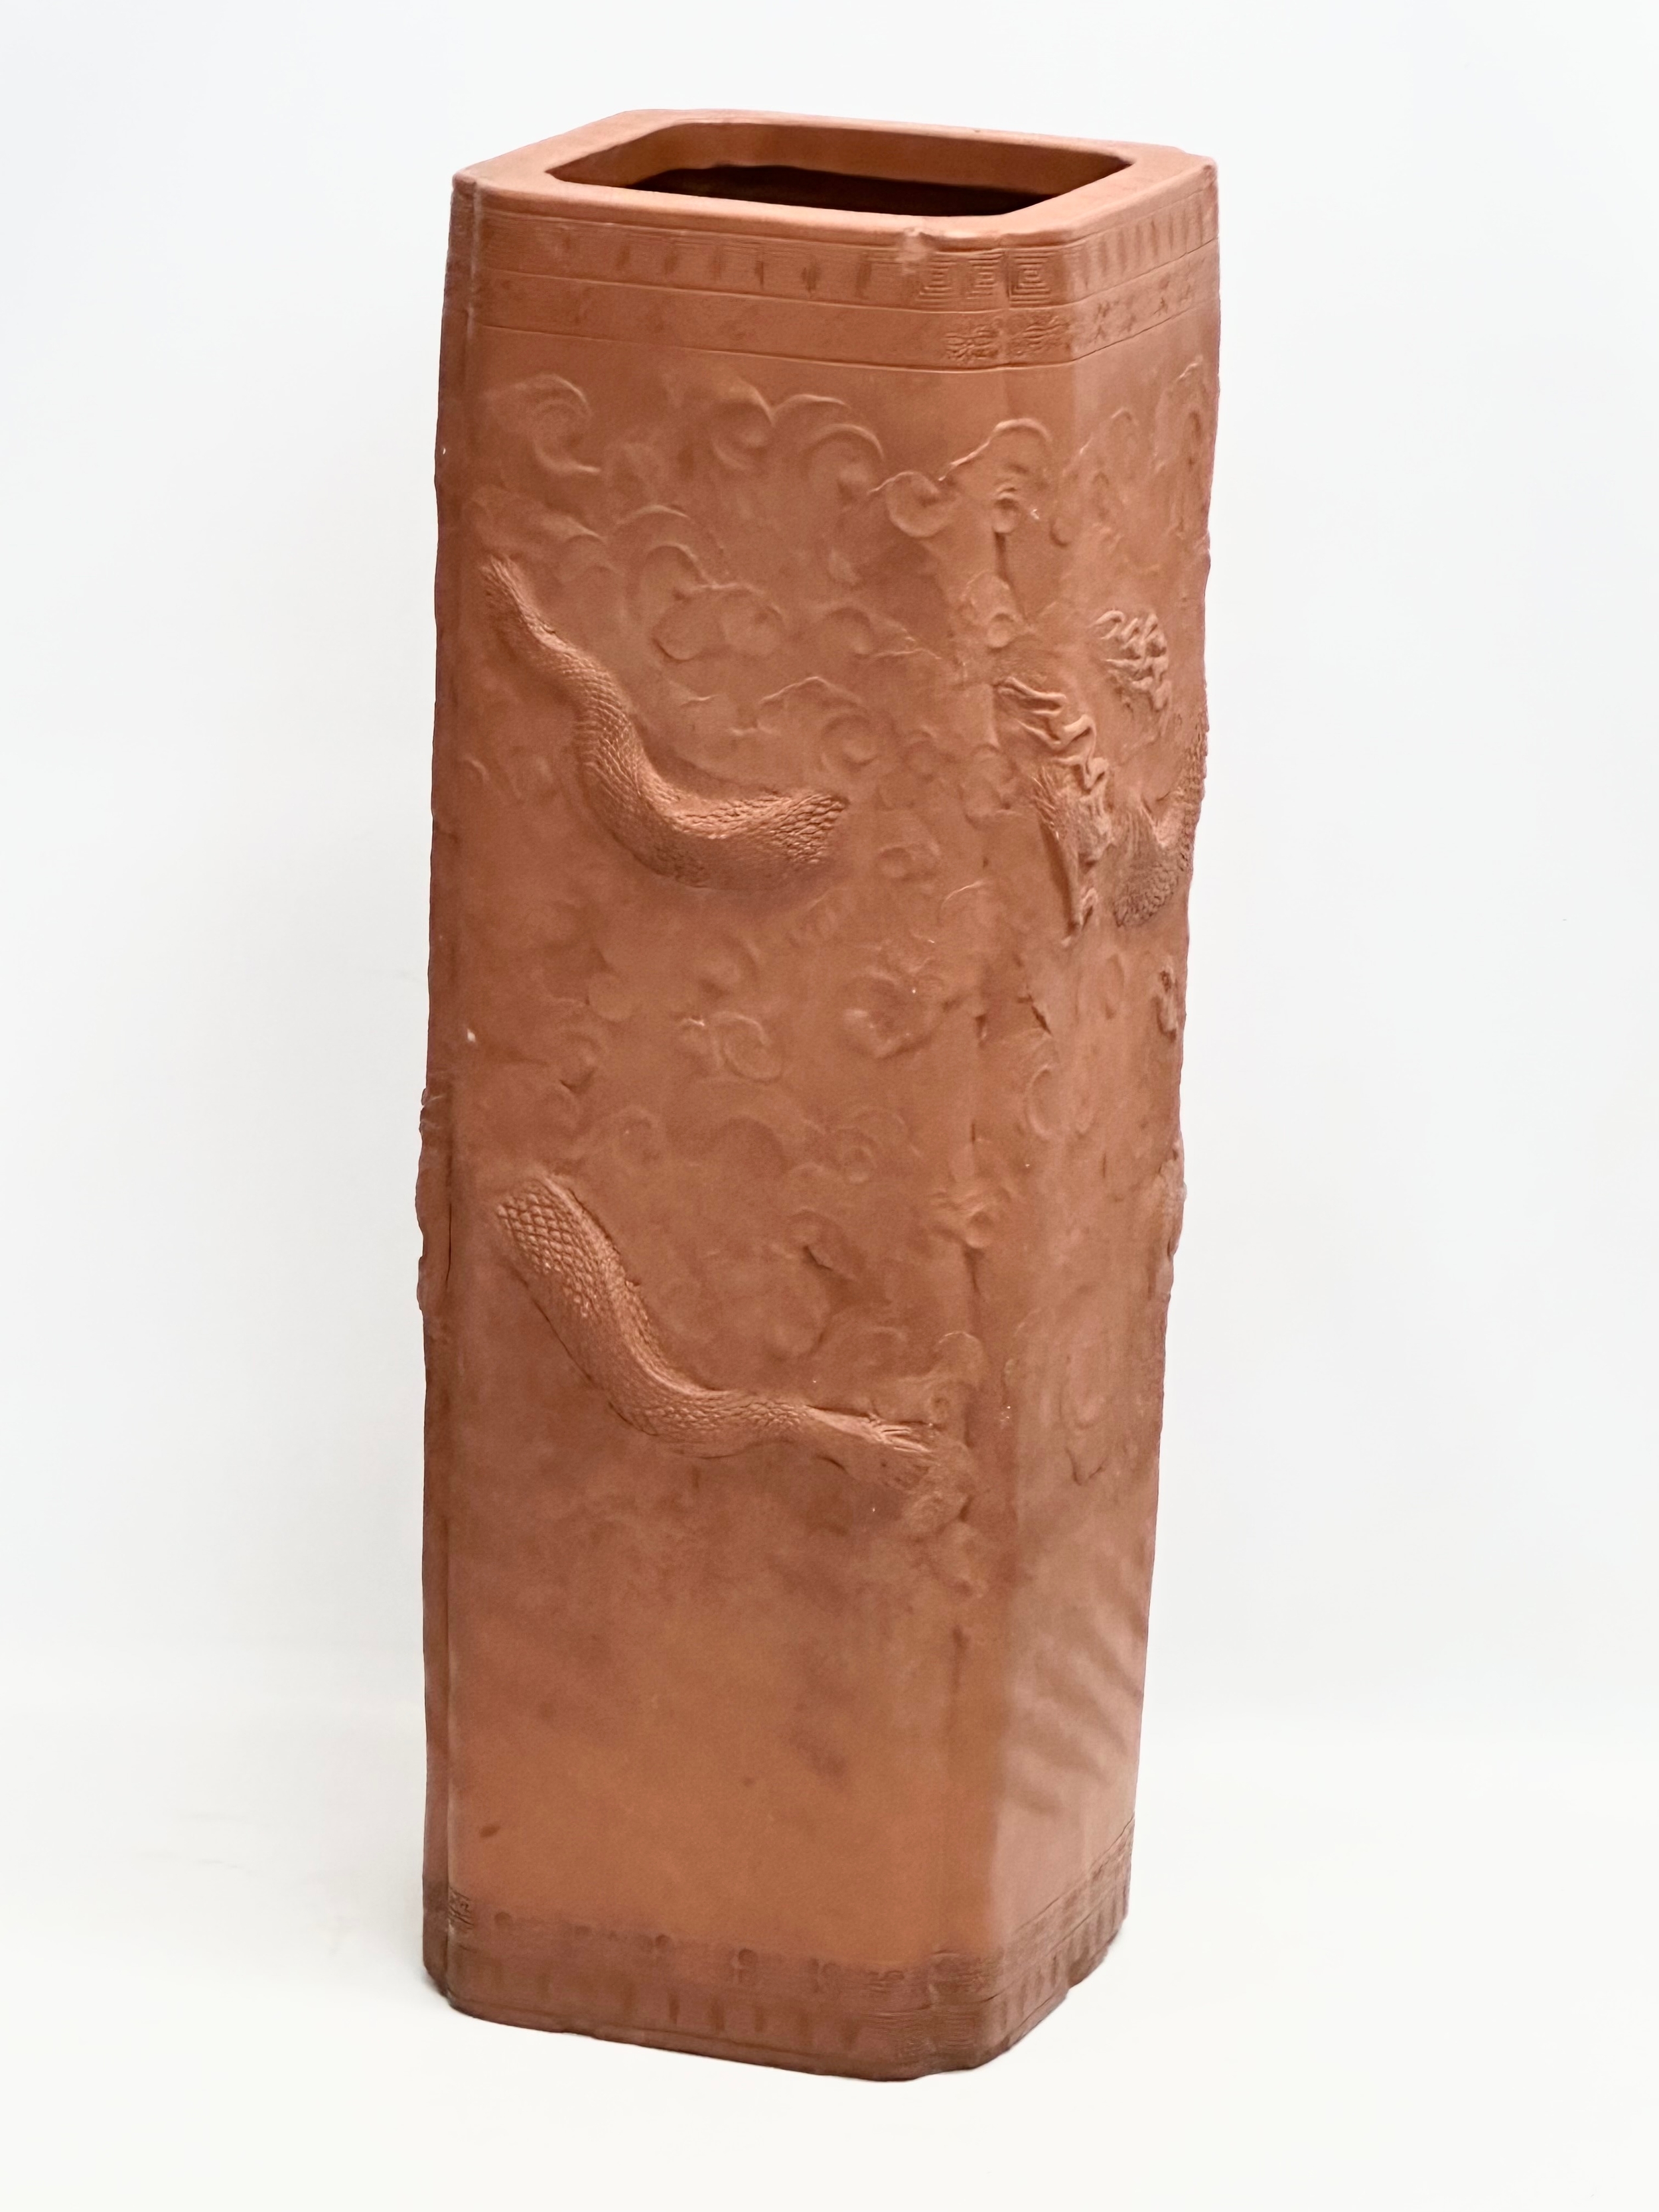 A Chinese terracotta stick stand/planter with dragon motif and Greek Key decoration. 21x21x61cm